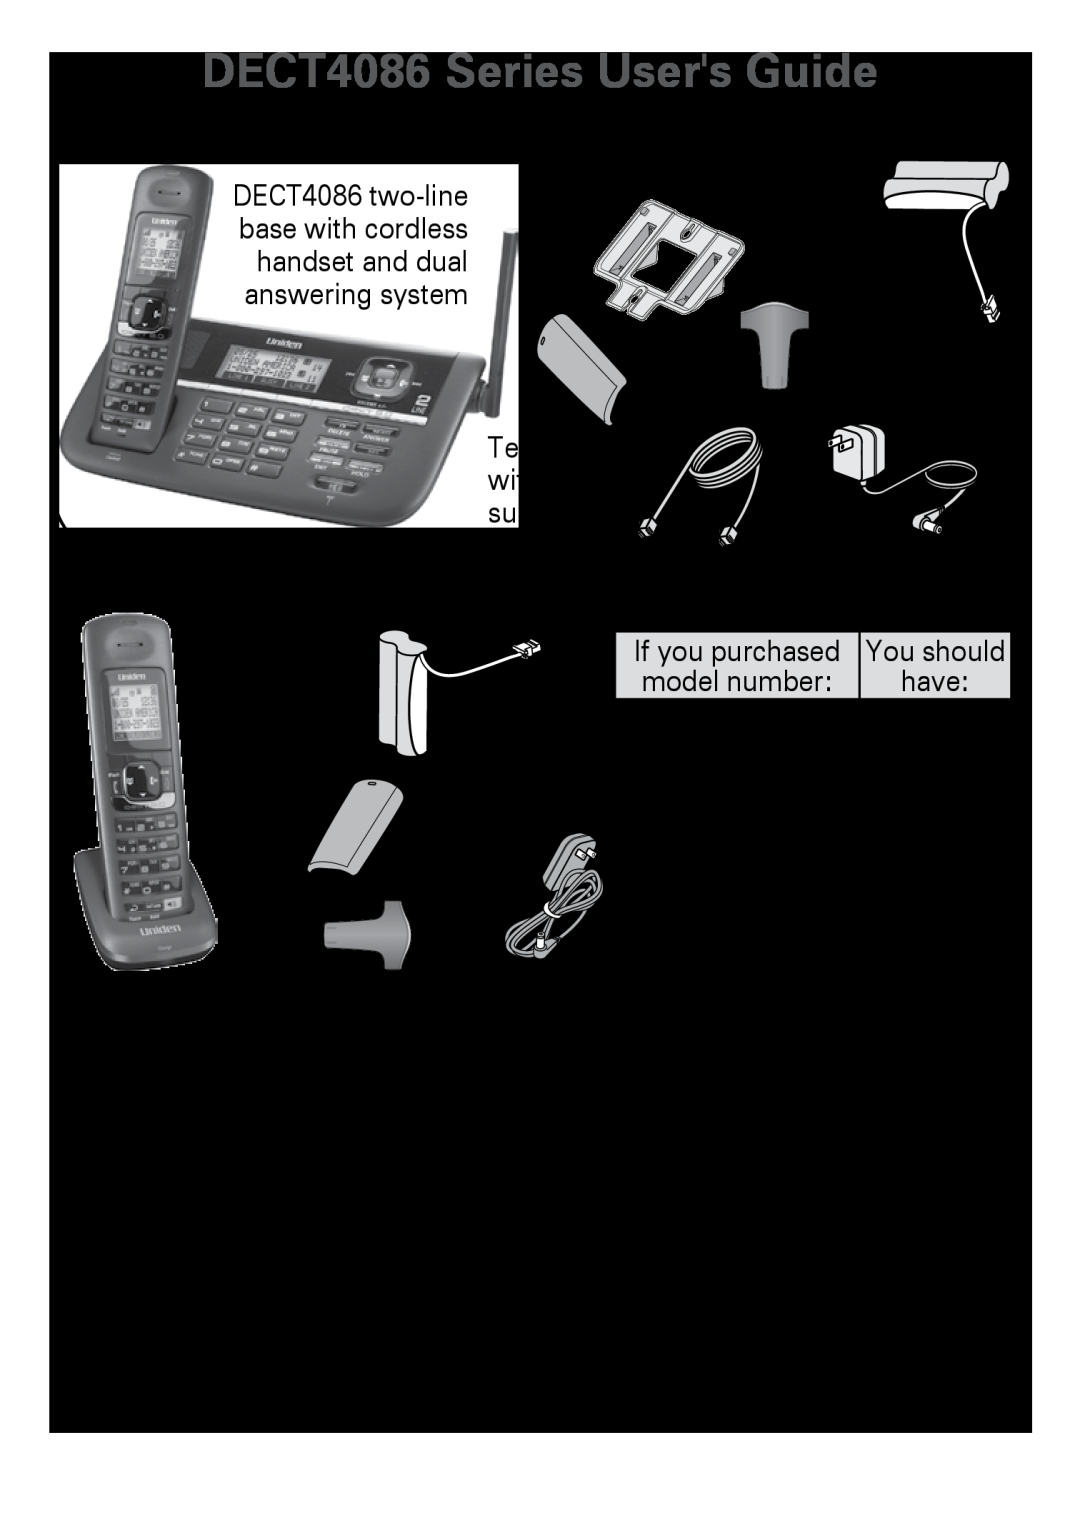 Uniden DECT4086-4 manual DECT4086 Series Users Guide, Whats in the box?, You might also find, If You, Phone Number 